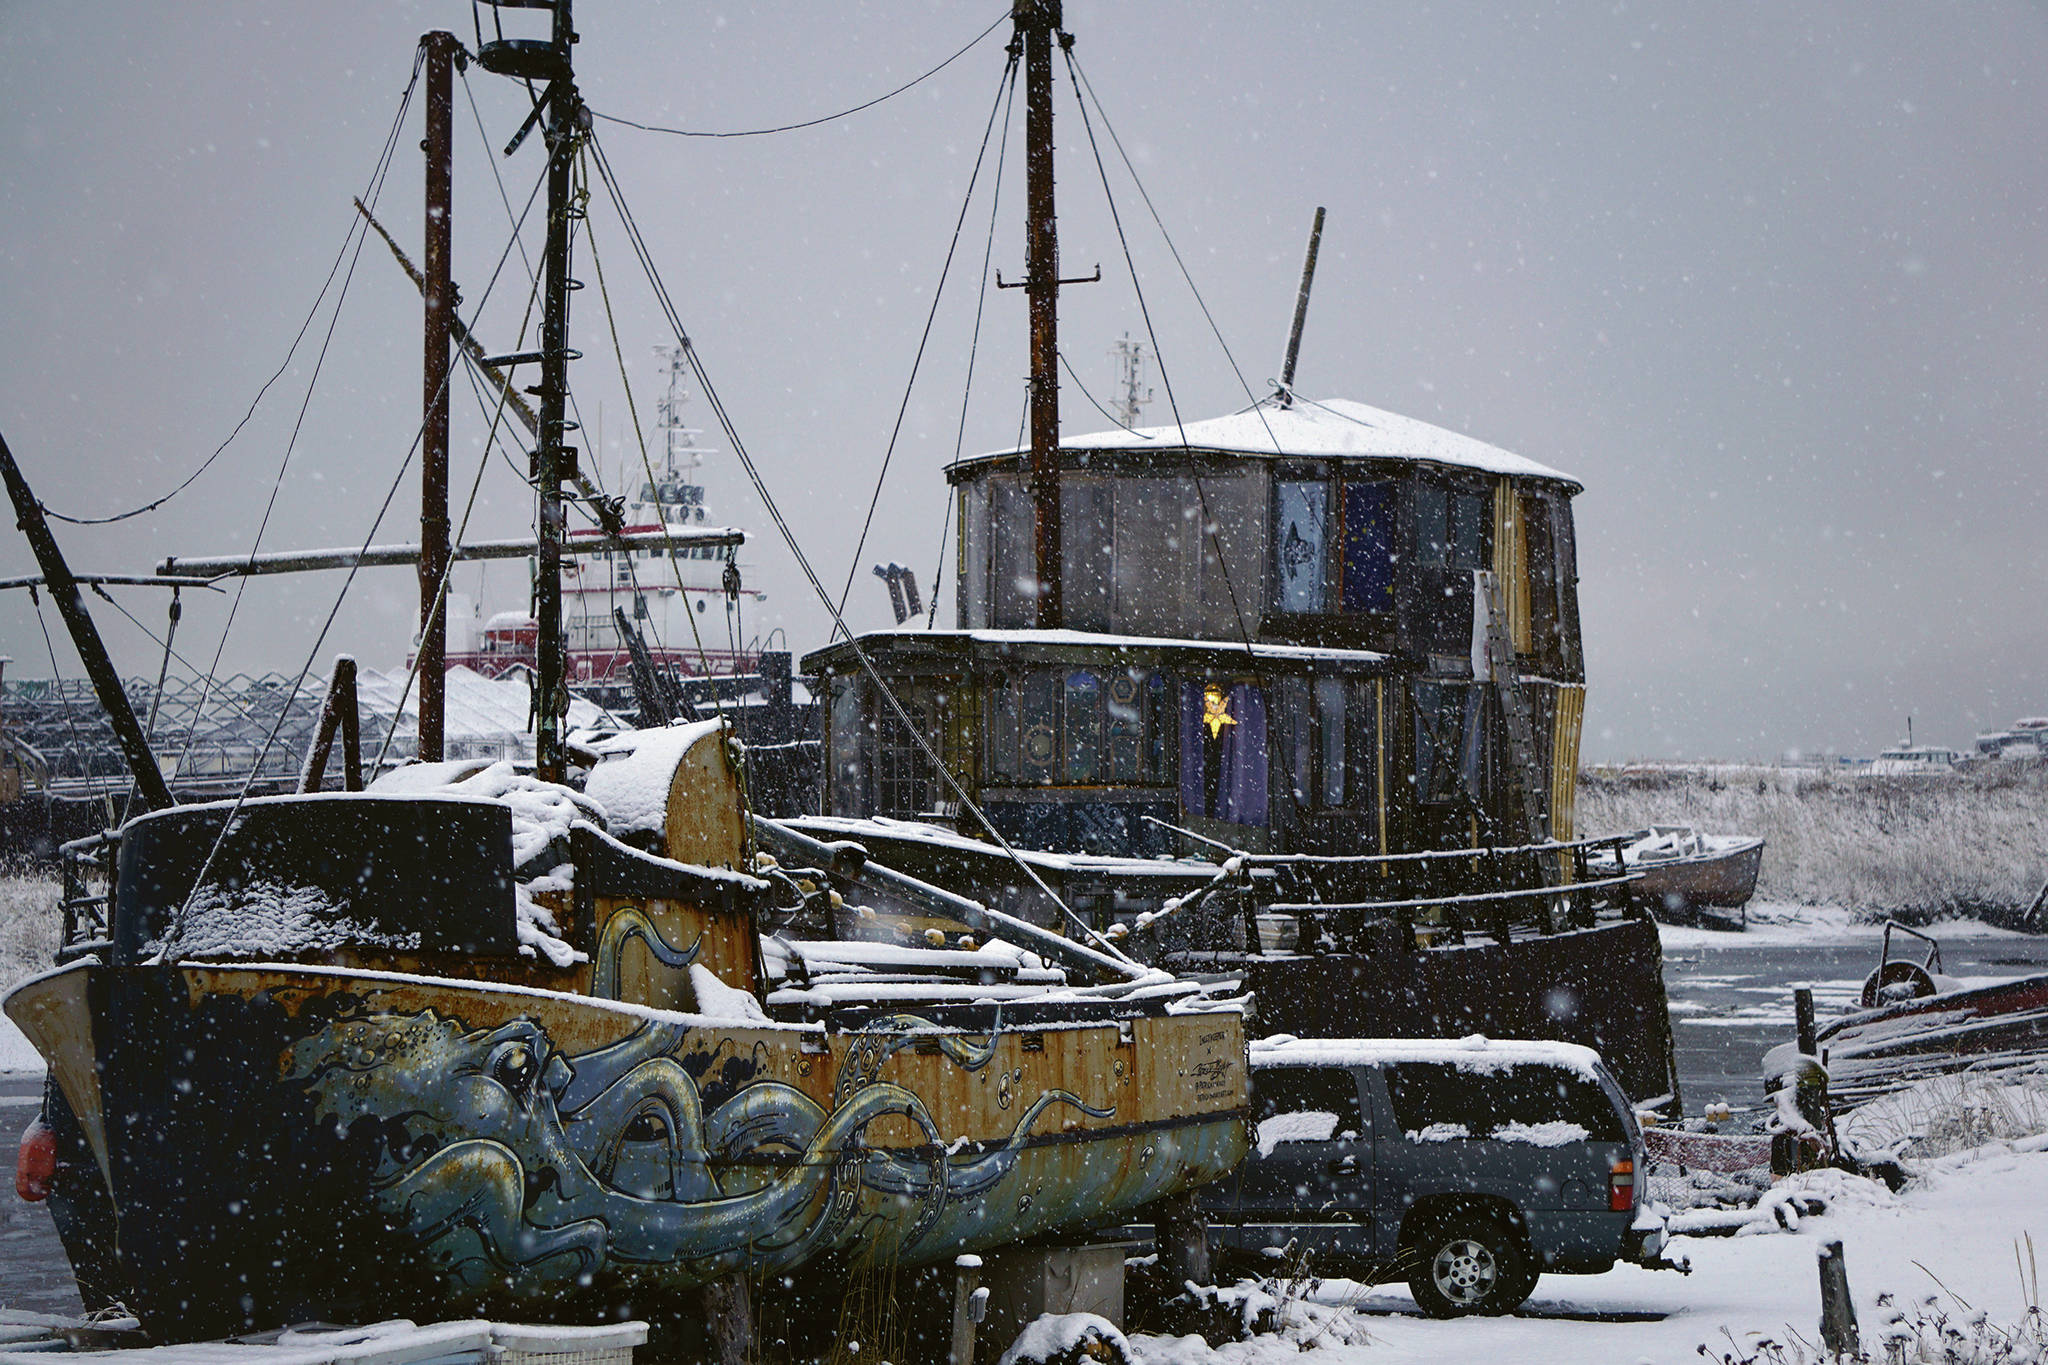 Snow falls on the Cape Lynch, right, and other boats on Sunday, Nov. 29, 2020, on the Homer Spit in Homer, Alaska. (Photo by Michael Armstrong/Homer News).